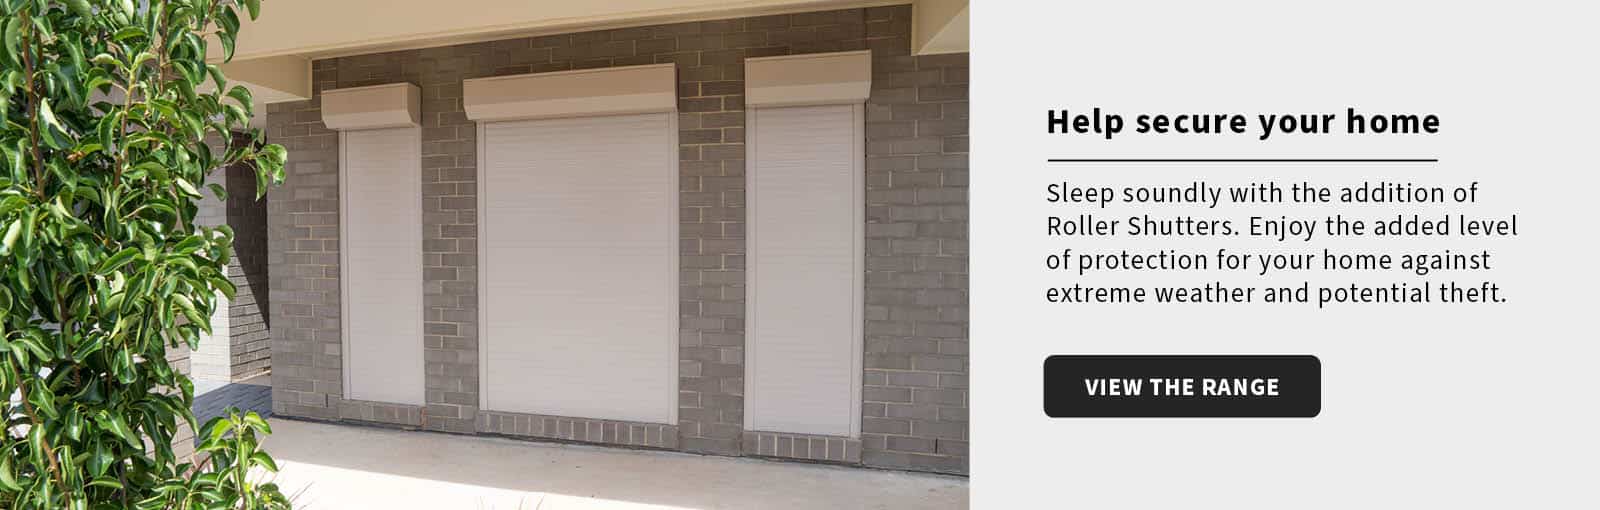 Secure your home with Roller Shutters